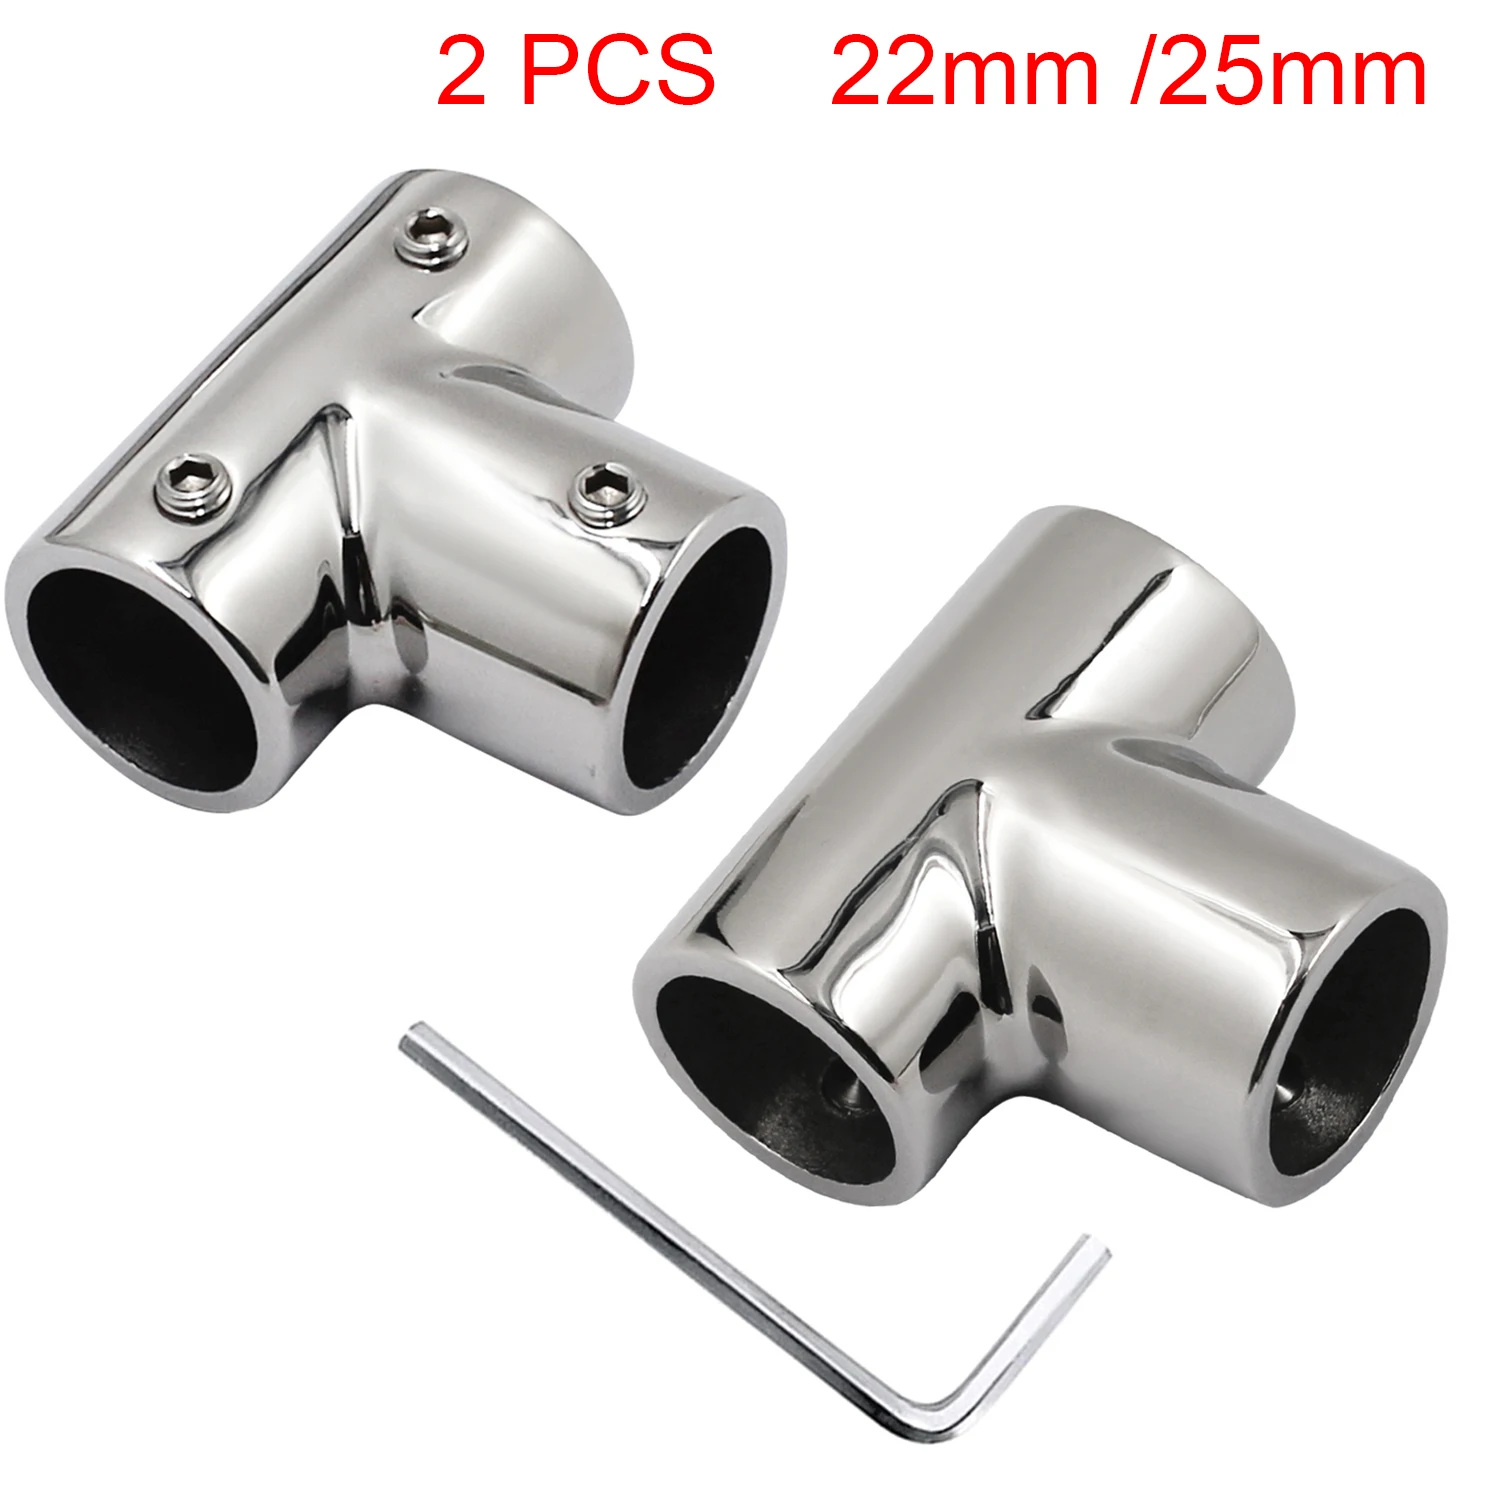 2 Pcs Stainless Steel 316 Marine Boat 3 Way Handrail Fitting 90° Deck Hand Rail Tee Joint Connector for 22mm/25mm Tube/Pipe 316 stainless steel 7 8 22mm tube pipe 3 way 60 degree tee hardware boat hand rail fitting boats accessories yacht marine 1pc